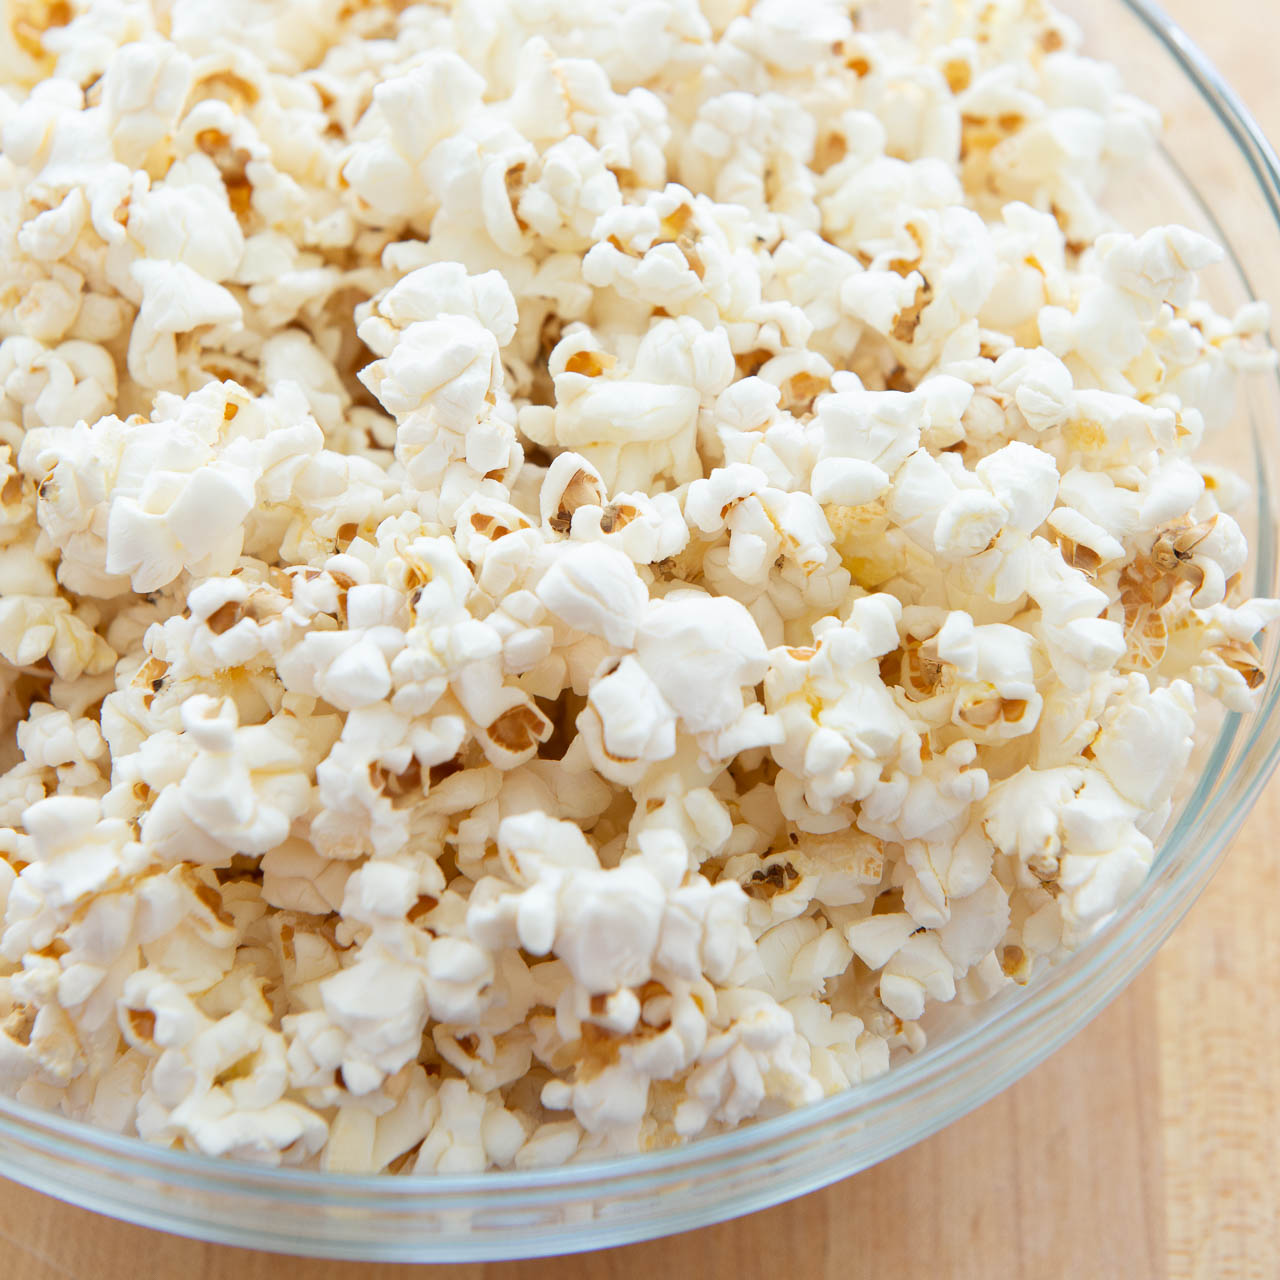 How to Make Popcorn on the Stove Perfectly Every Time